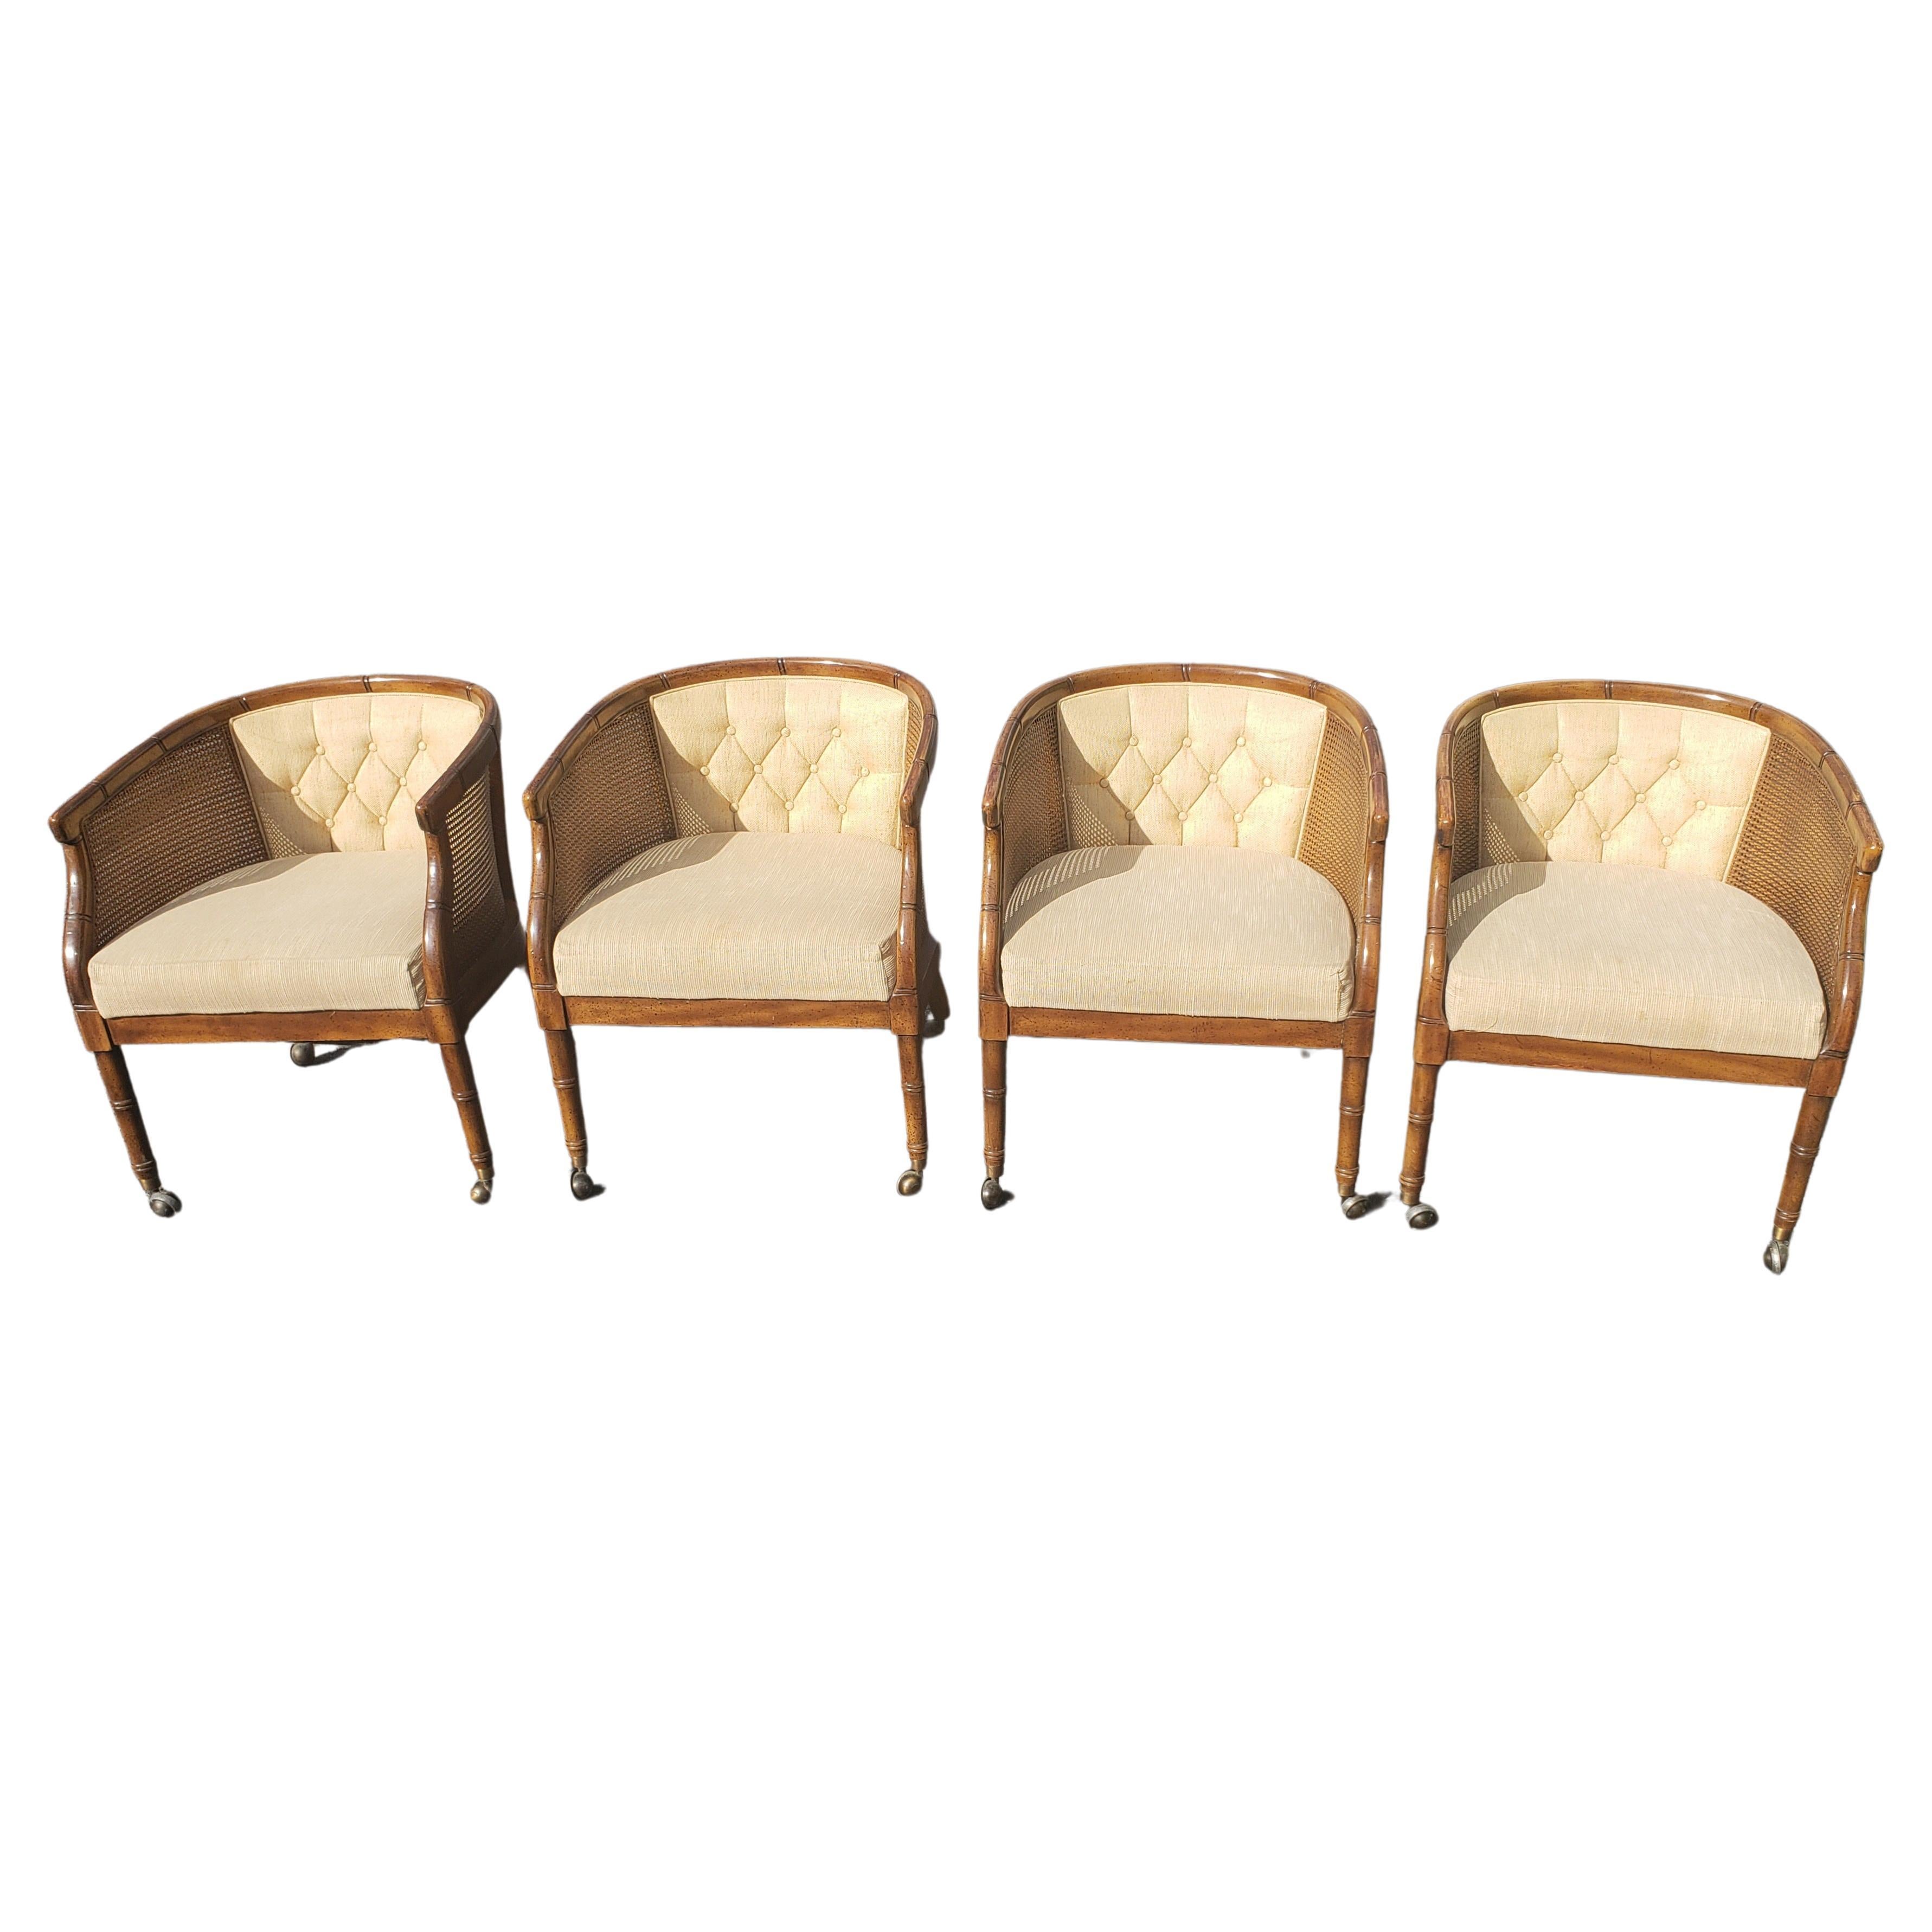 Upholstery Henredon French Country Walnut Faux Cane Bamboo Upholstered Club Accent Chairs